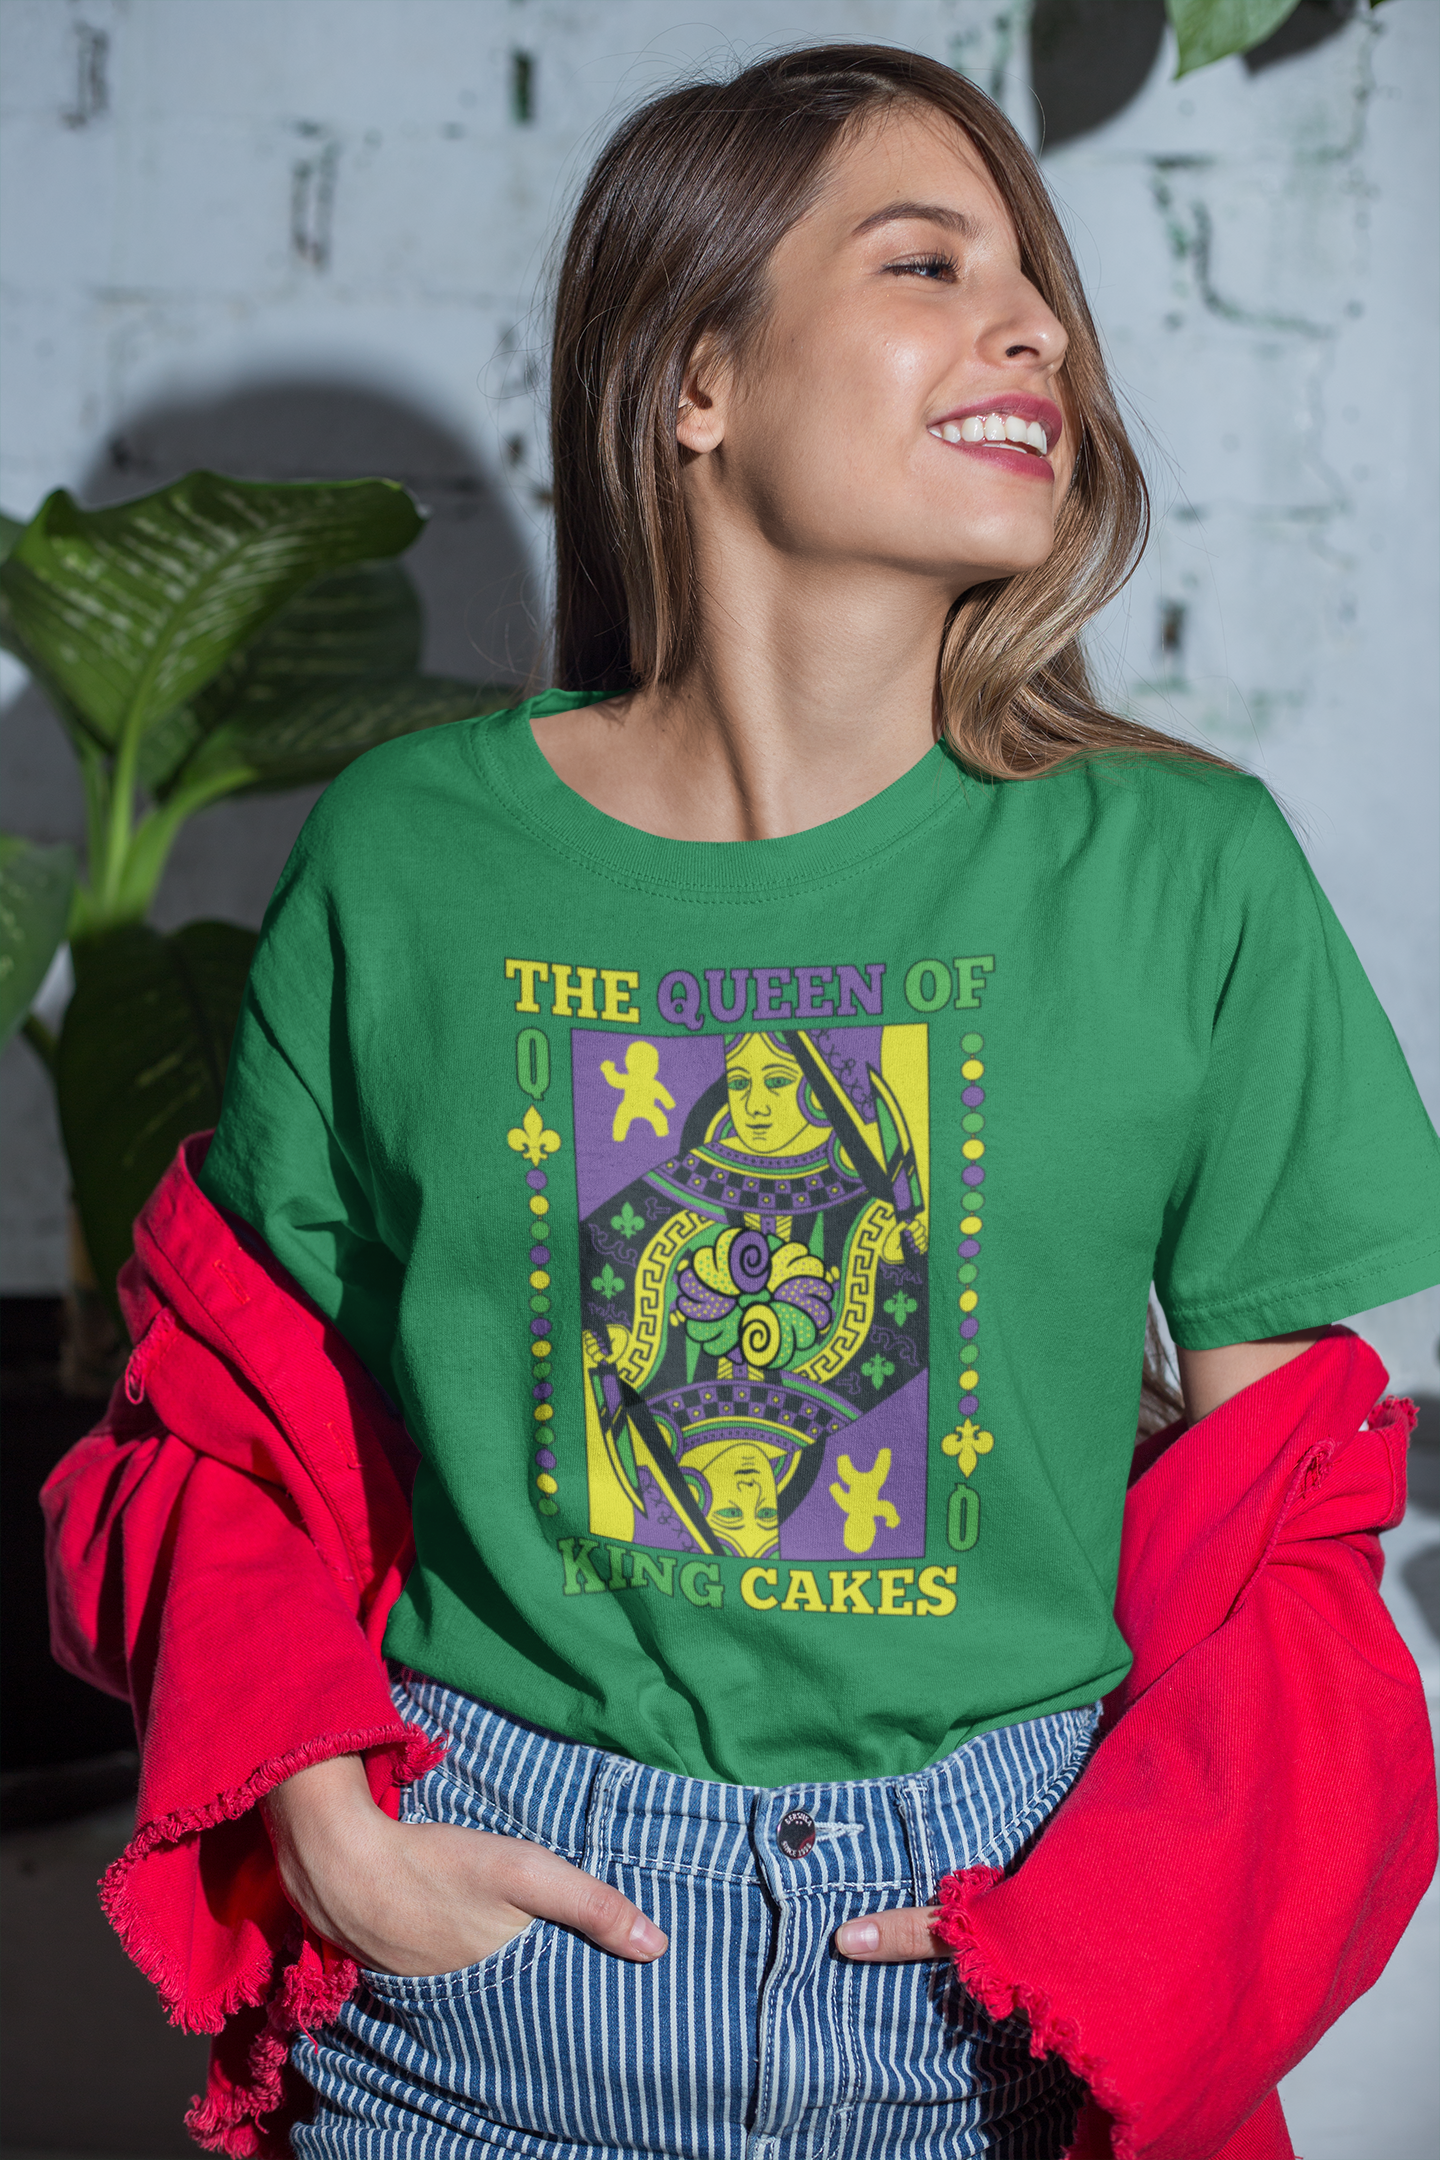 The Queen of King Cakes T-Shirt